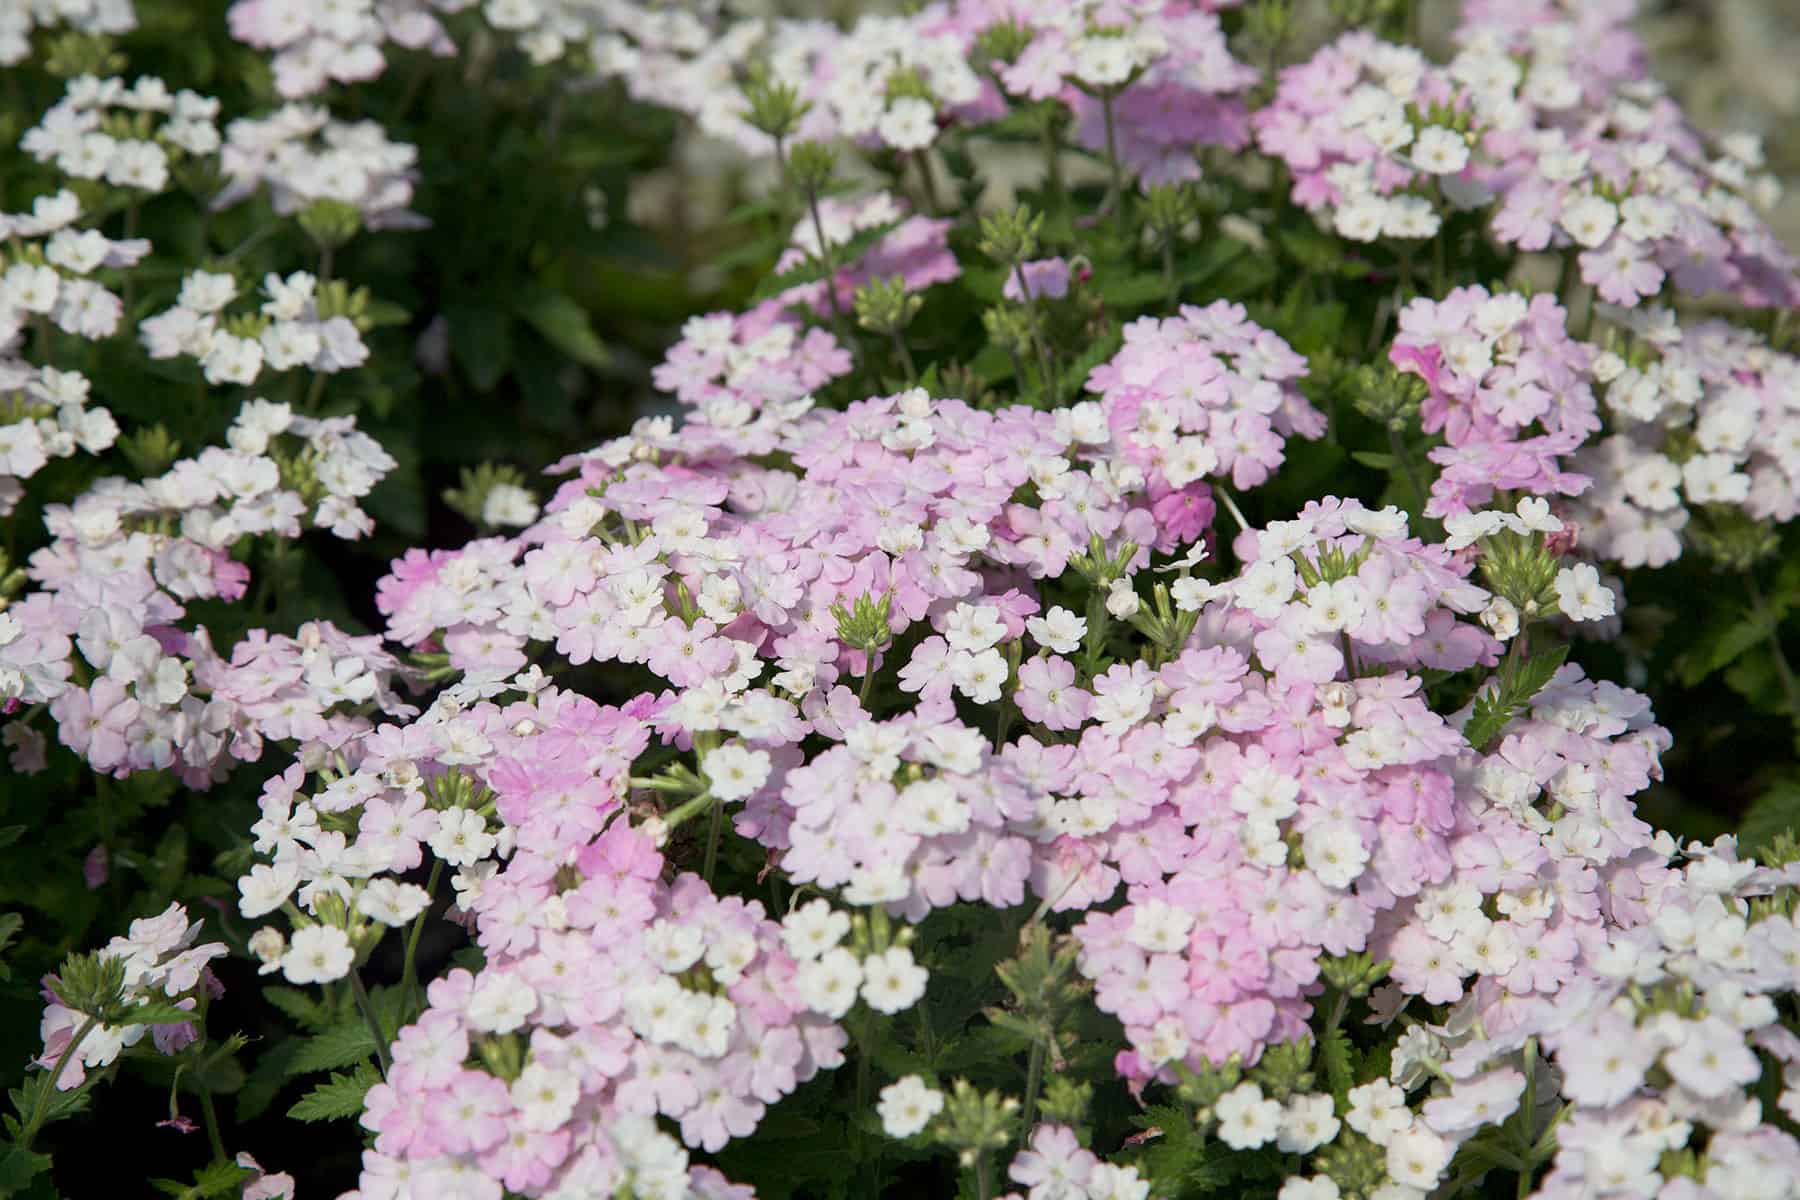 White Blush Verbena's blush pink to white flowers form tight bundles of color above dark green, low-growing foliage